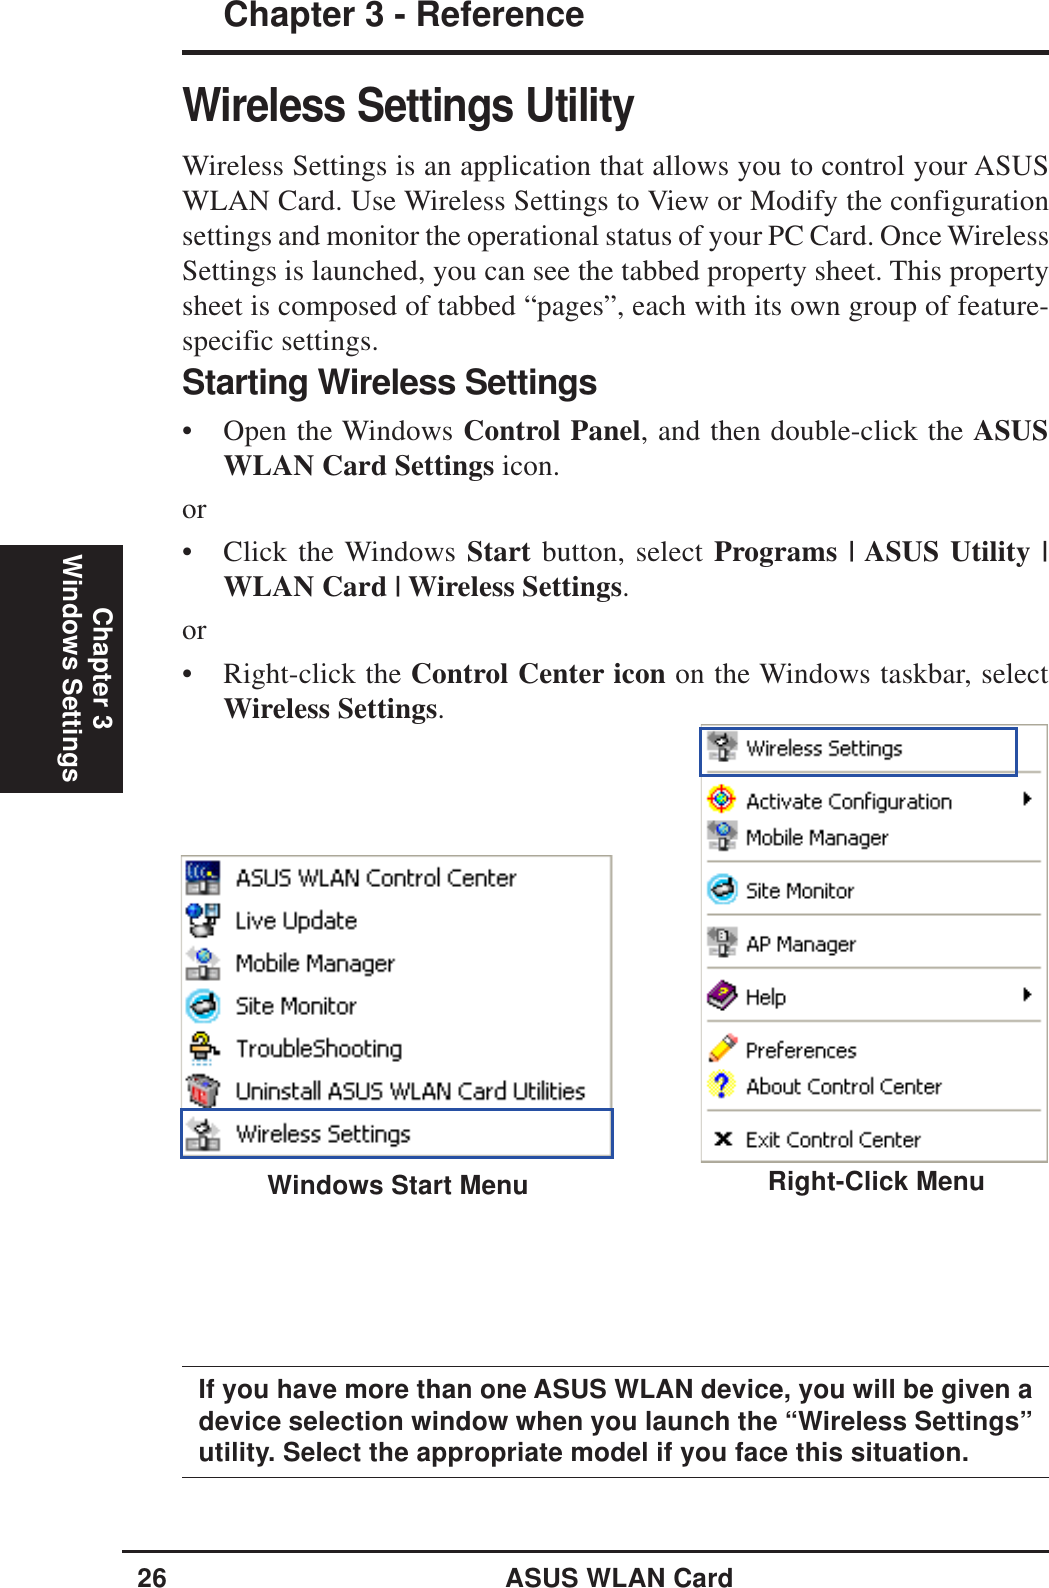 26 ASUS WLAN CardChapter 3 - ReferenceChapter 3Windows SettingsWireless Settings UtilityWireless Settings is an application that allows you to control your ASUSWLAN Card. Use Wireless Settings to View or Modify the configurationsettings and monitor the operational status of your PC Card. Once WirelessSettings is launched, you can see the tabbed property sheet. This propertysheet is composed of tabbed “pages”, each with its own group of feature-specific settings.Right-Click MenuIf you have more than one ASUS WLAN device, you will be given adevice selection window when you launch the “Wireless Settings”utility. Select the appropriate model if you face this situation.Starting Wireless Settings• Open the Windows Control Panel, and then double-click the ASUSWLAN Card Settings icon.or• Click the Windows Start button, select Programs | ASUS Utility |WLAN Card | Wireless Settings.or• Right-click the Control Center icon on the Windows taskbar, selectWireless Settings.Windows Start Menu